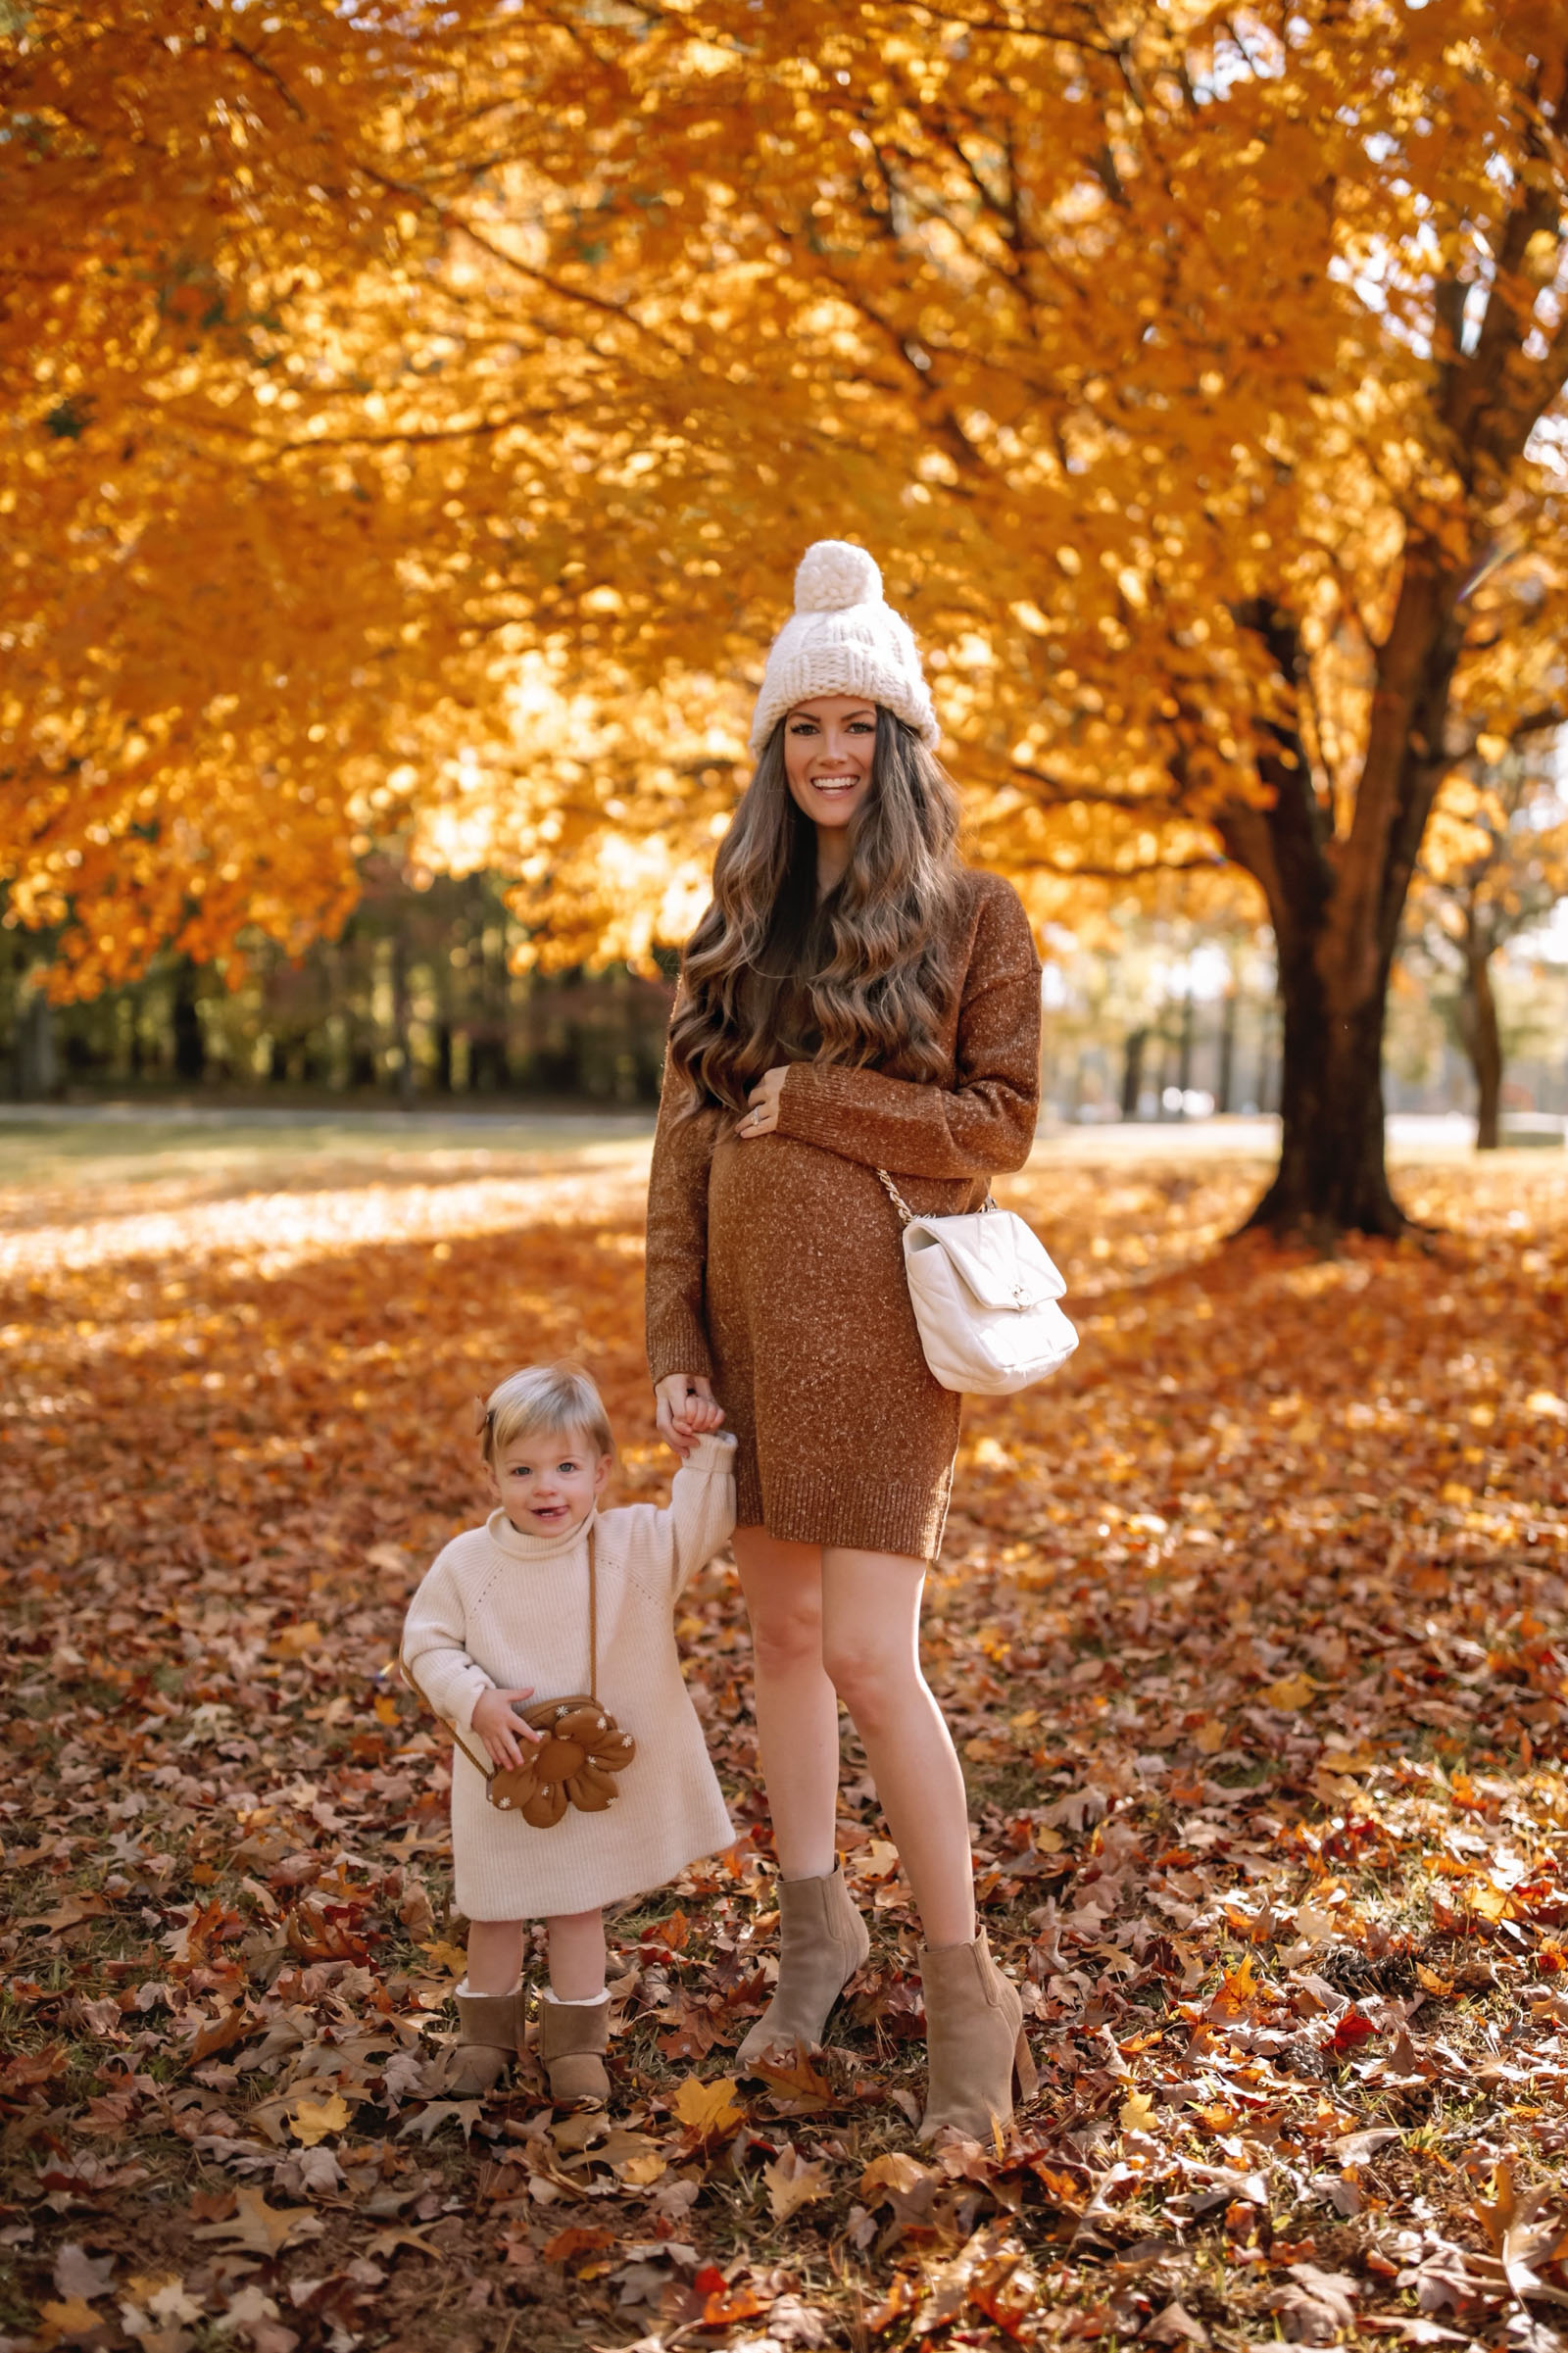 https://www.southerncurlsandpearls.com/wp-content/uploads/2022/11/nordstrom-sweater-dress-toddler-UGG-boots-chunky-beanie-christian-girl-autumn-7.jpg